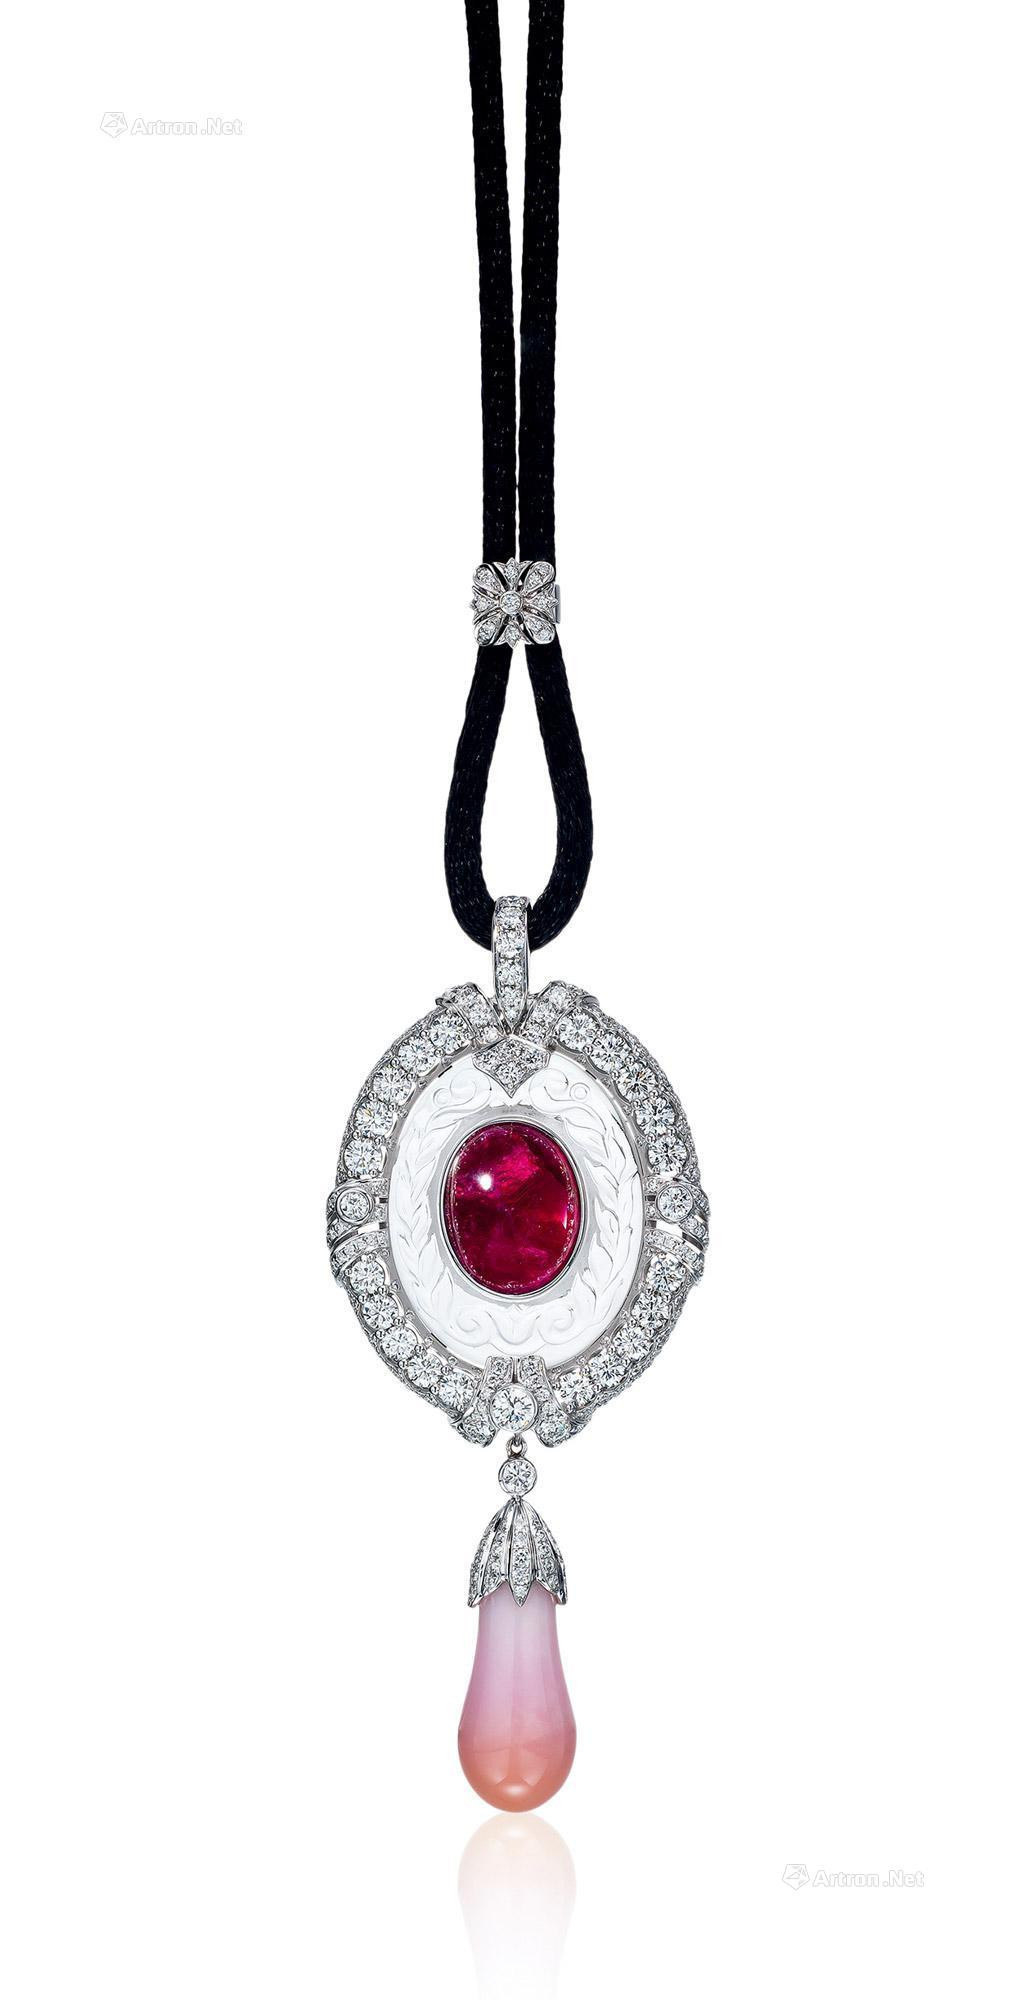 A 9.95 CARAT BURMESE RUBY， CONCH PEARL， DIAMOND AND CRYSTAL PENDANT NECKLACE